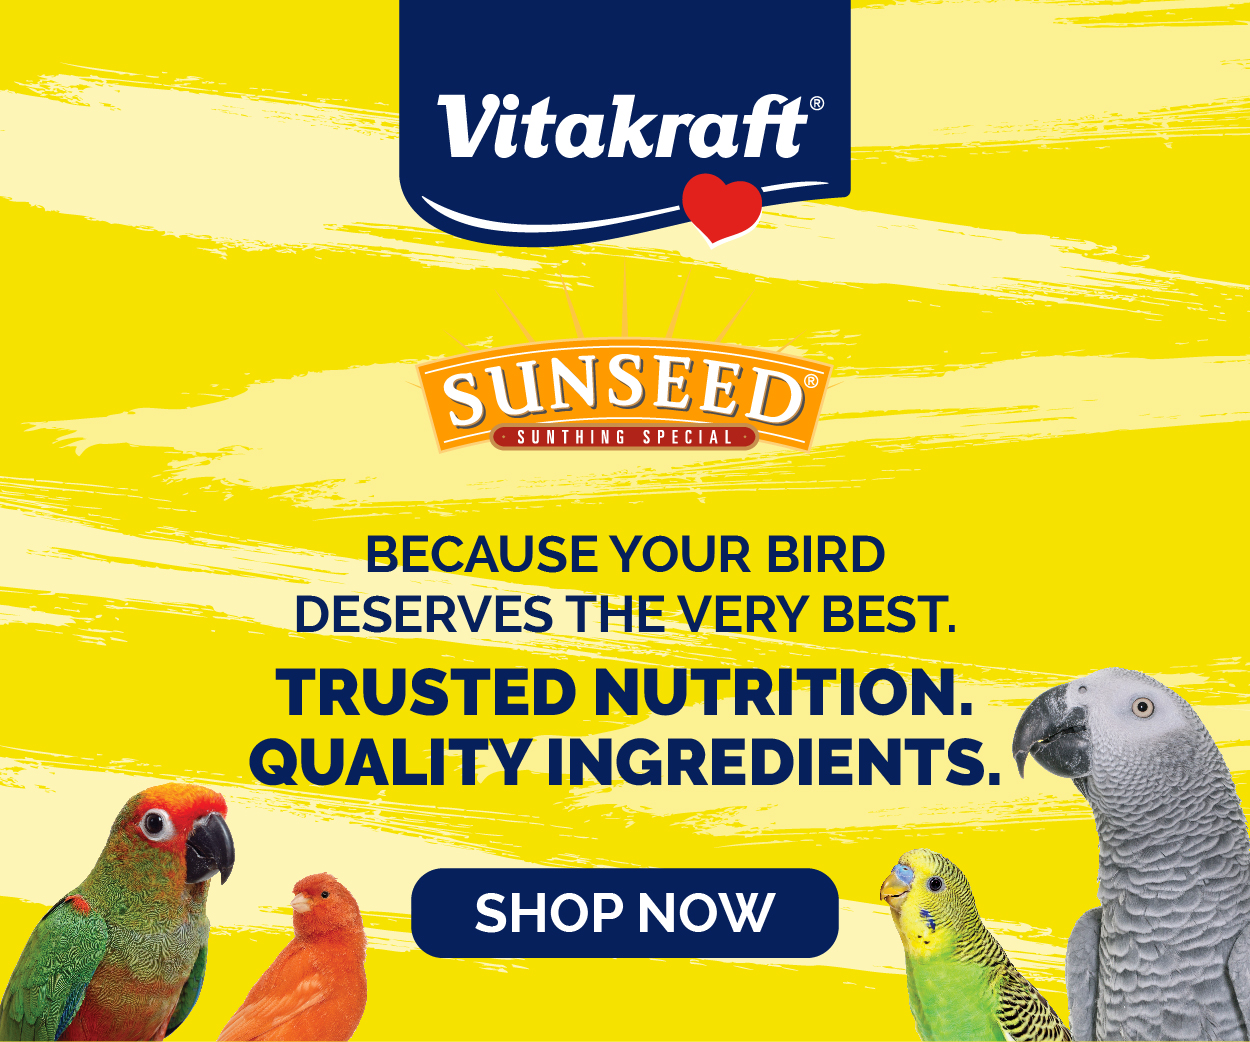 Vitakraft Sunseed — because your bird deserves the very best. Trusted nutrition. Quality ingredients. Shop now.